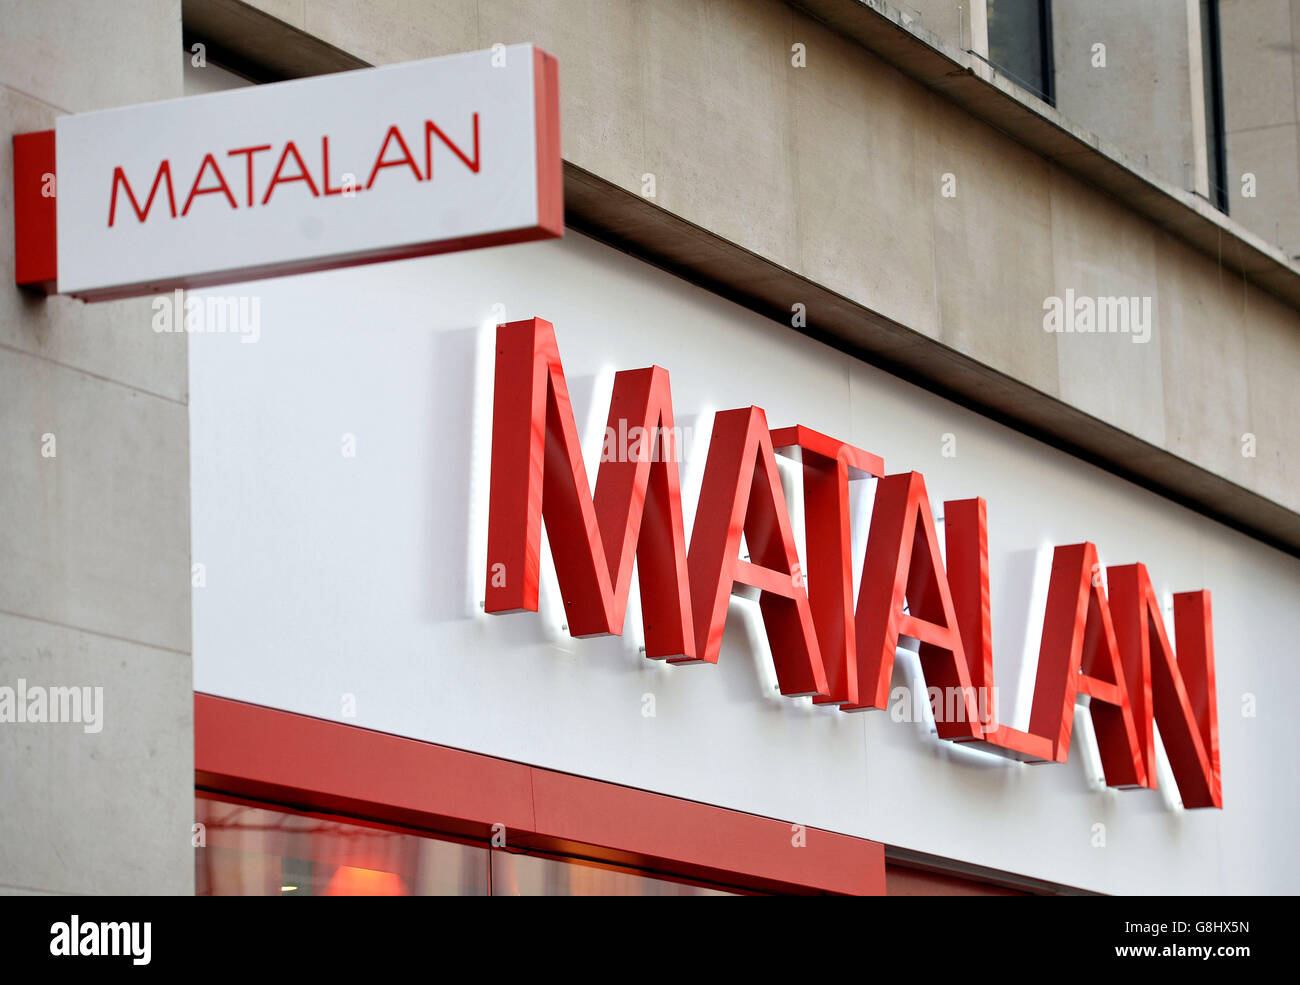 Shop sign stock. A shop sign for MATALAN in central London. Stock Photo